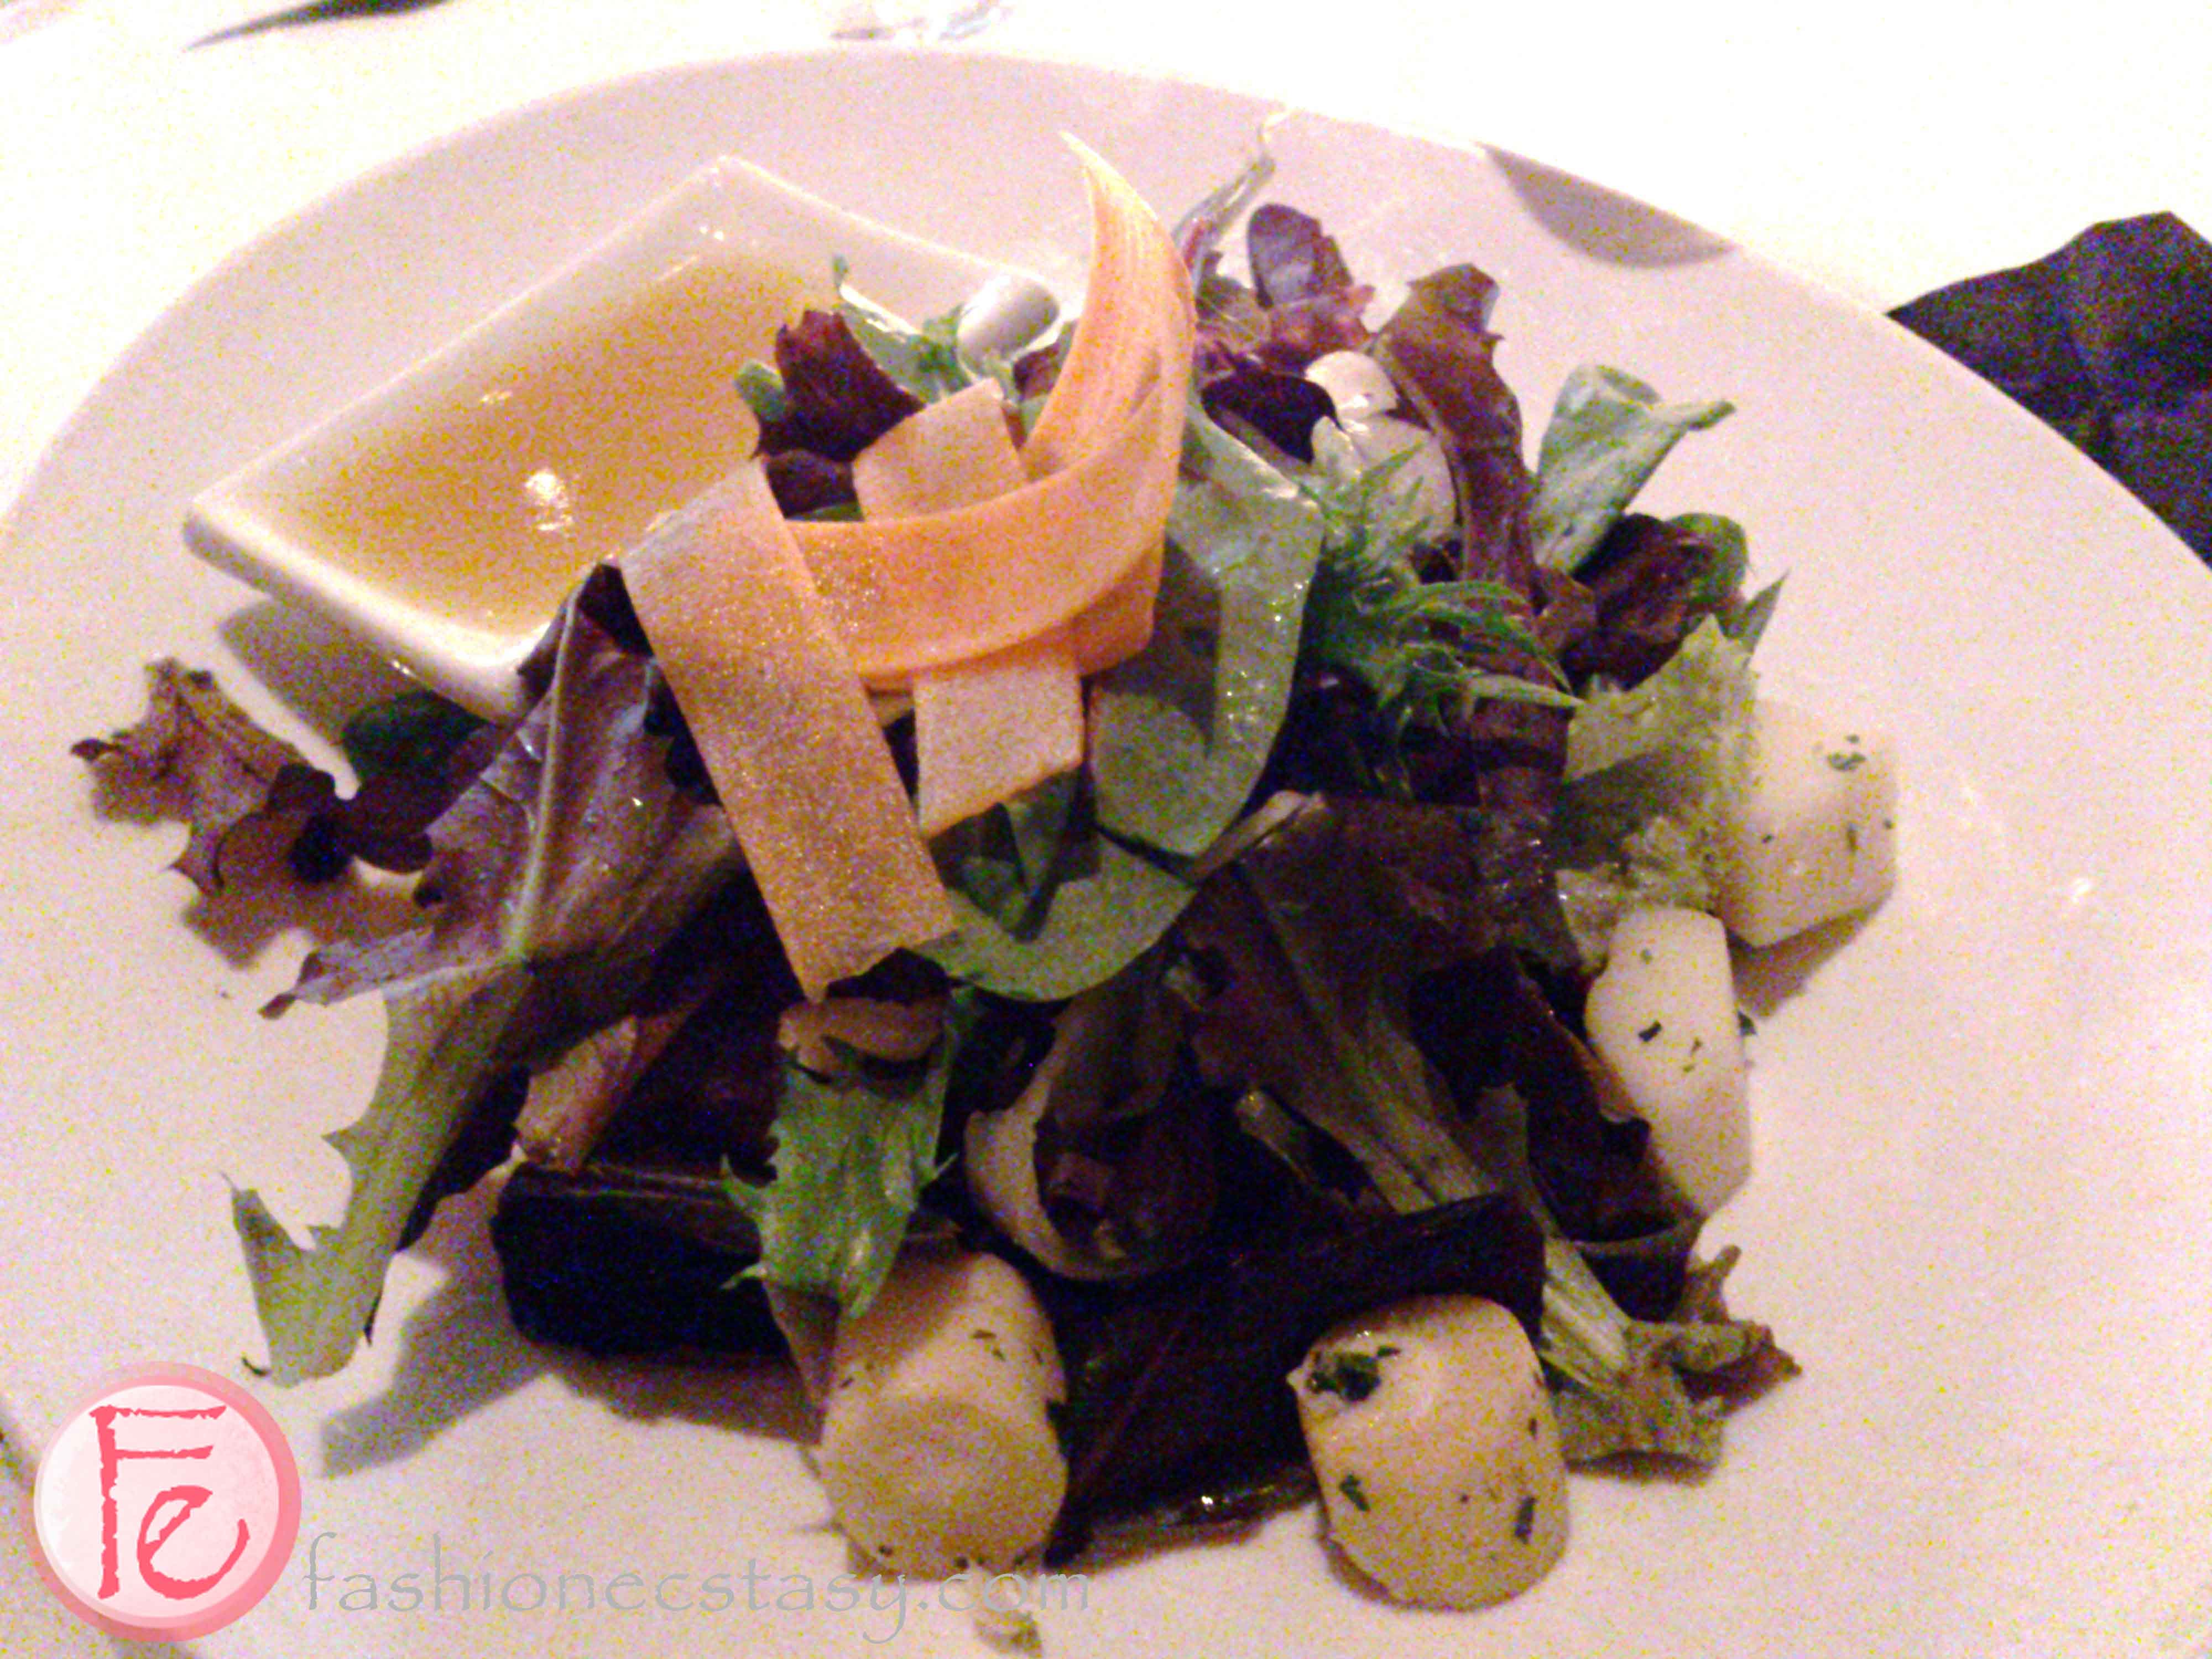 OYA Restaurant's Mesclun Mix with mixed greens, grilled hearts of palm and yuzu cilantro dressing 